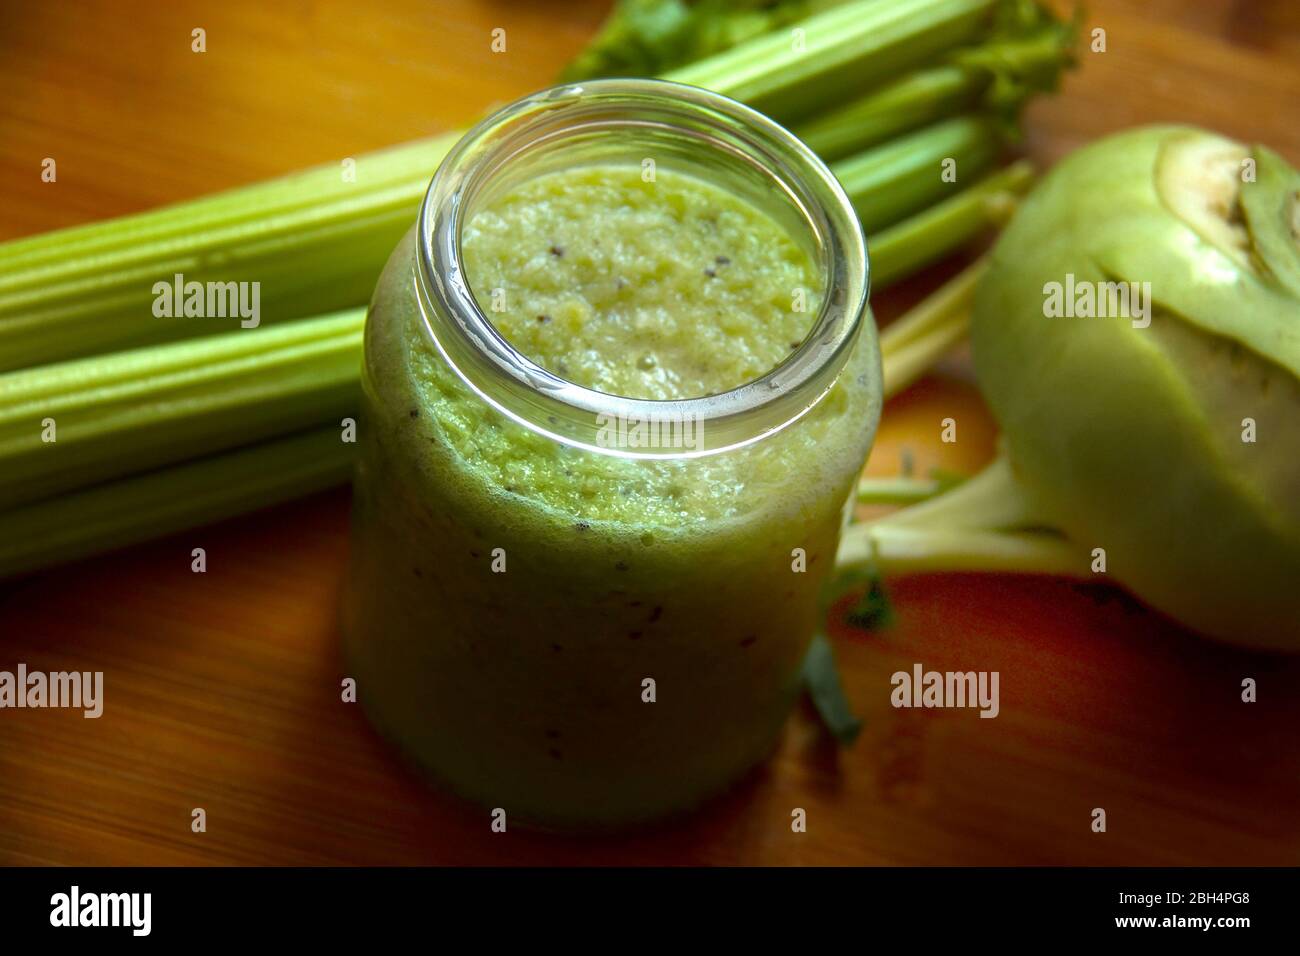 Green detox juice in glass jar. Healthy eating concept. Vegetable and fruit smoothie. Stock Photo